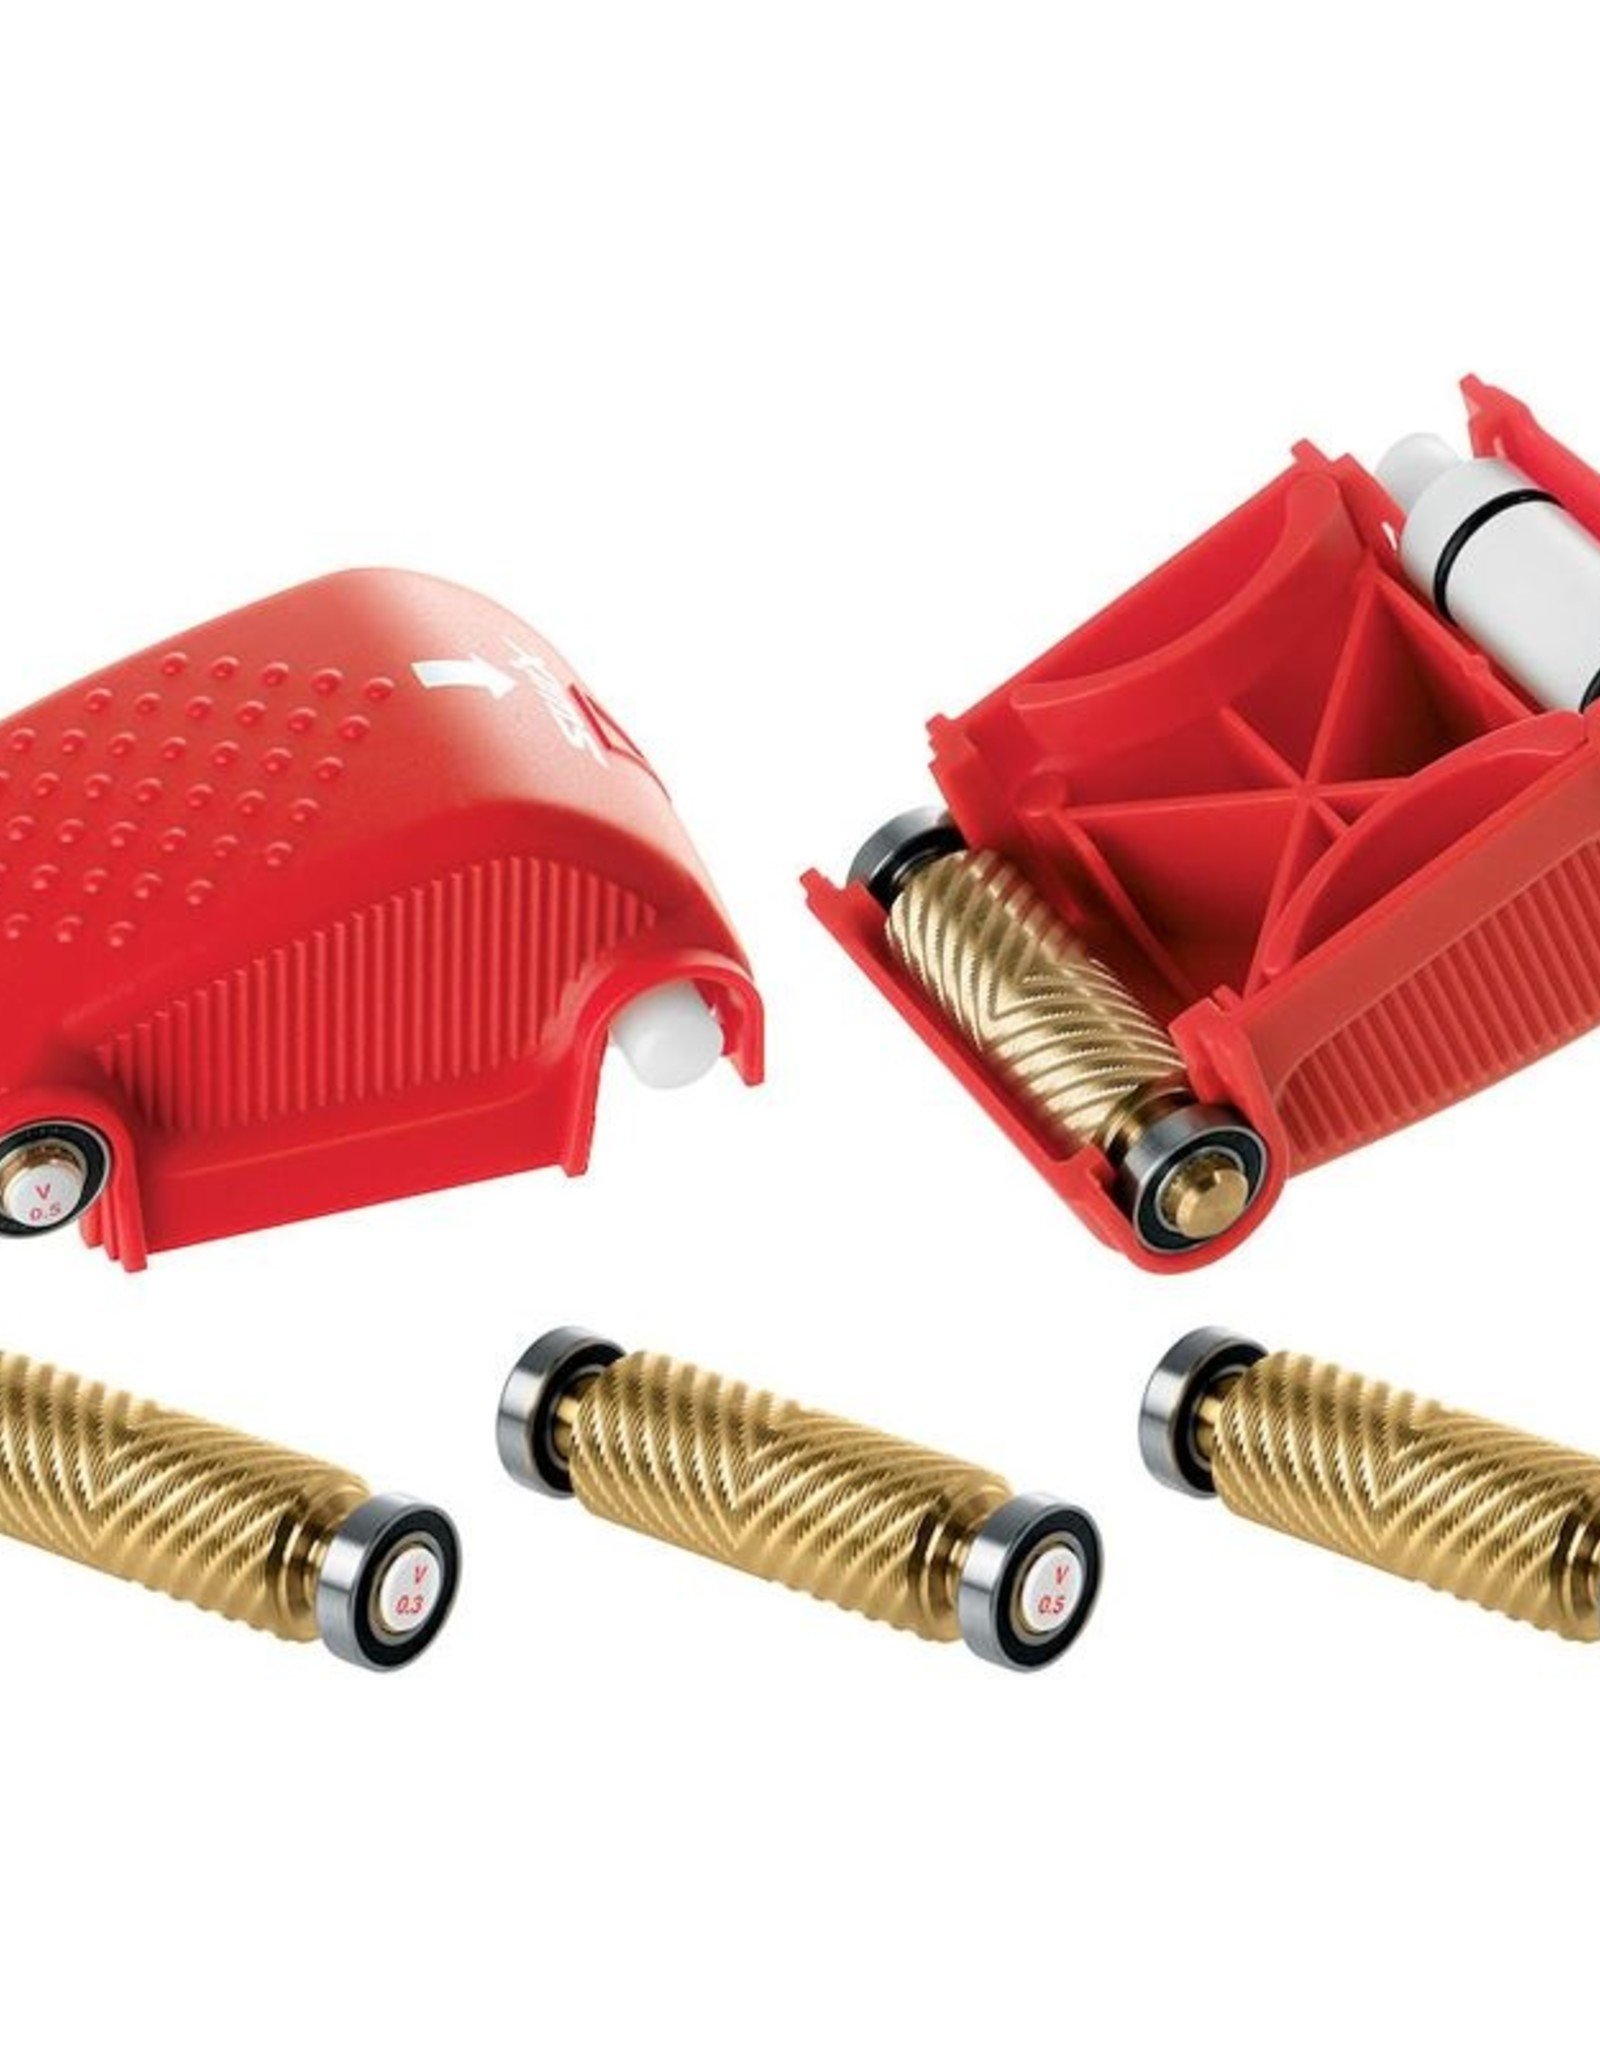 SWIX SWIX STRUCTURE KIT WITH 3 ROLLERS